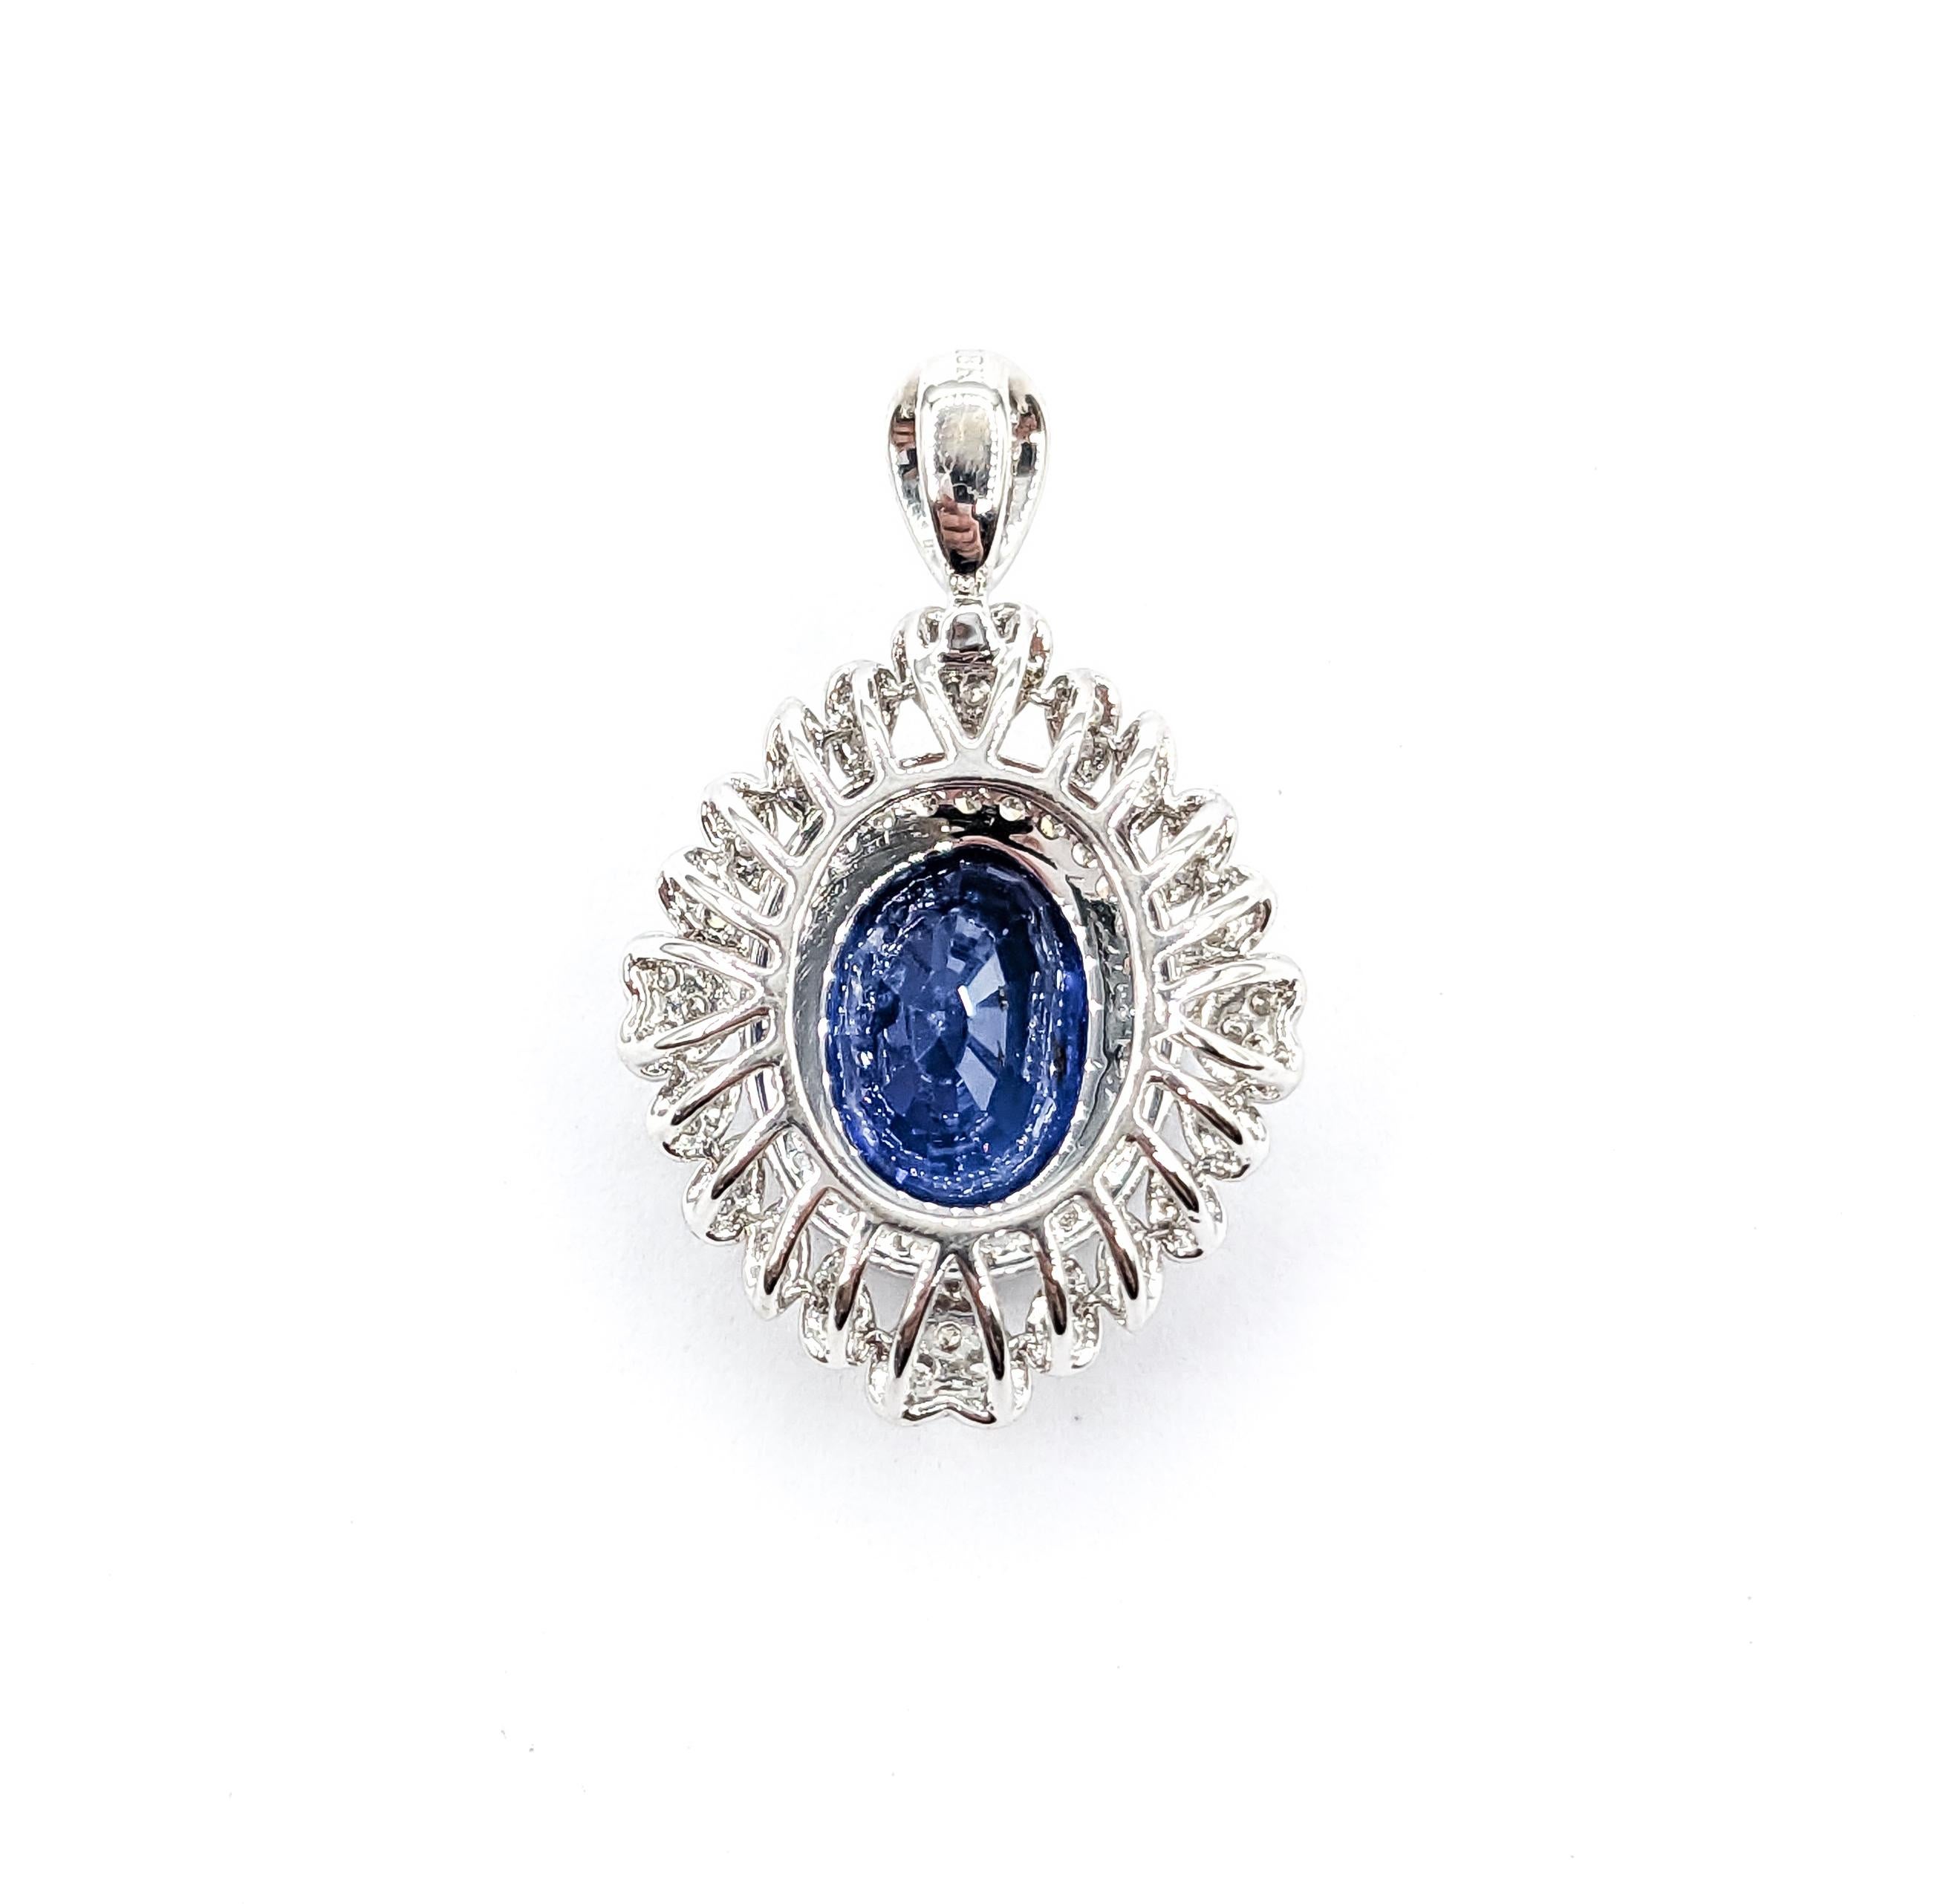 GIA 1.96ct Heat Only Sri Lanka Sapphire & Diamond Pendant In White Gold


This exquisite Gemstone Fashion Pendant is a stunning creation set in 18k white gold, featuring a halo design that magnifies the allure of the central gem. It showcases a